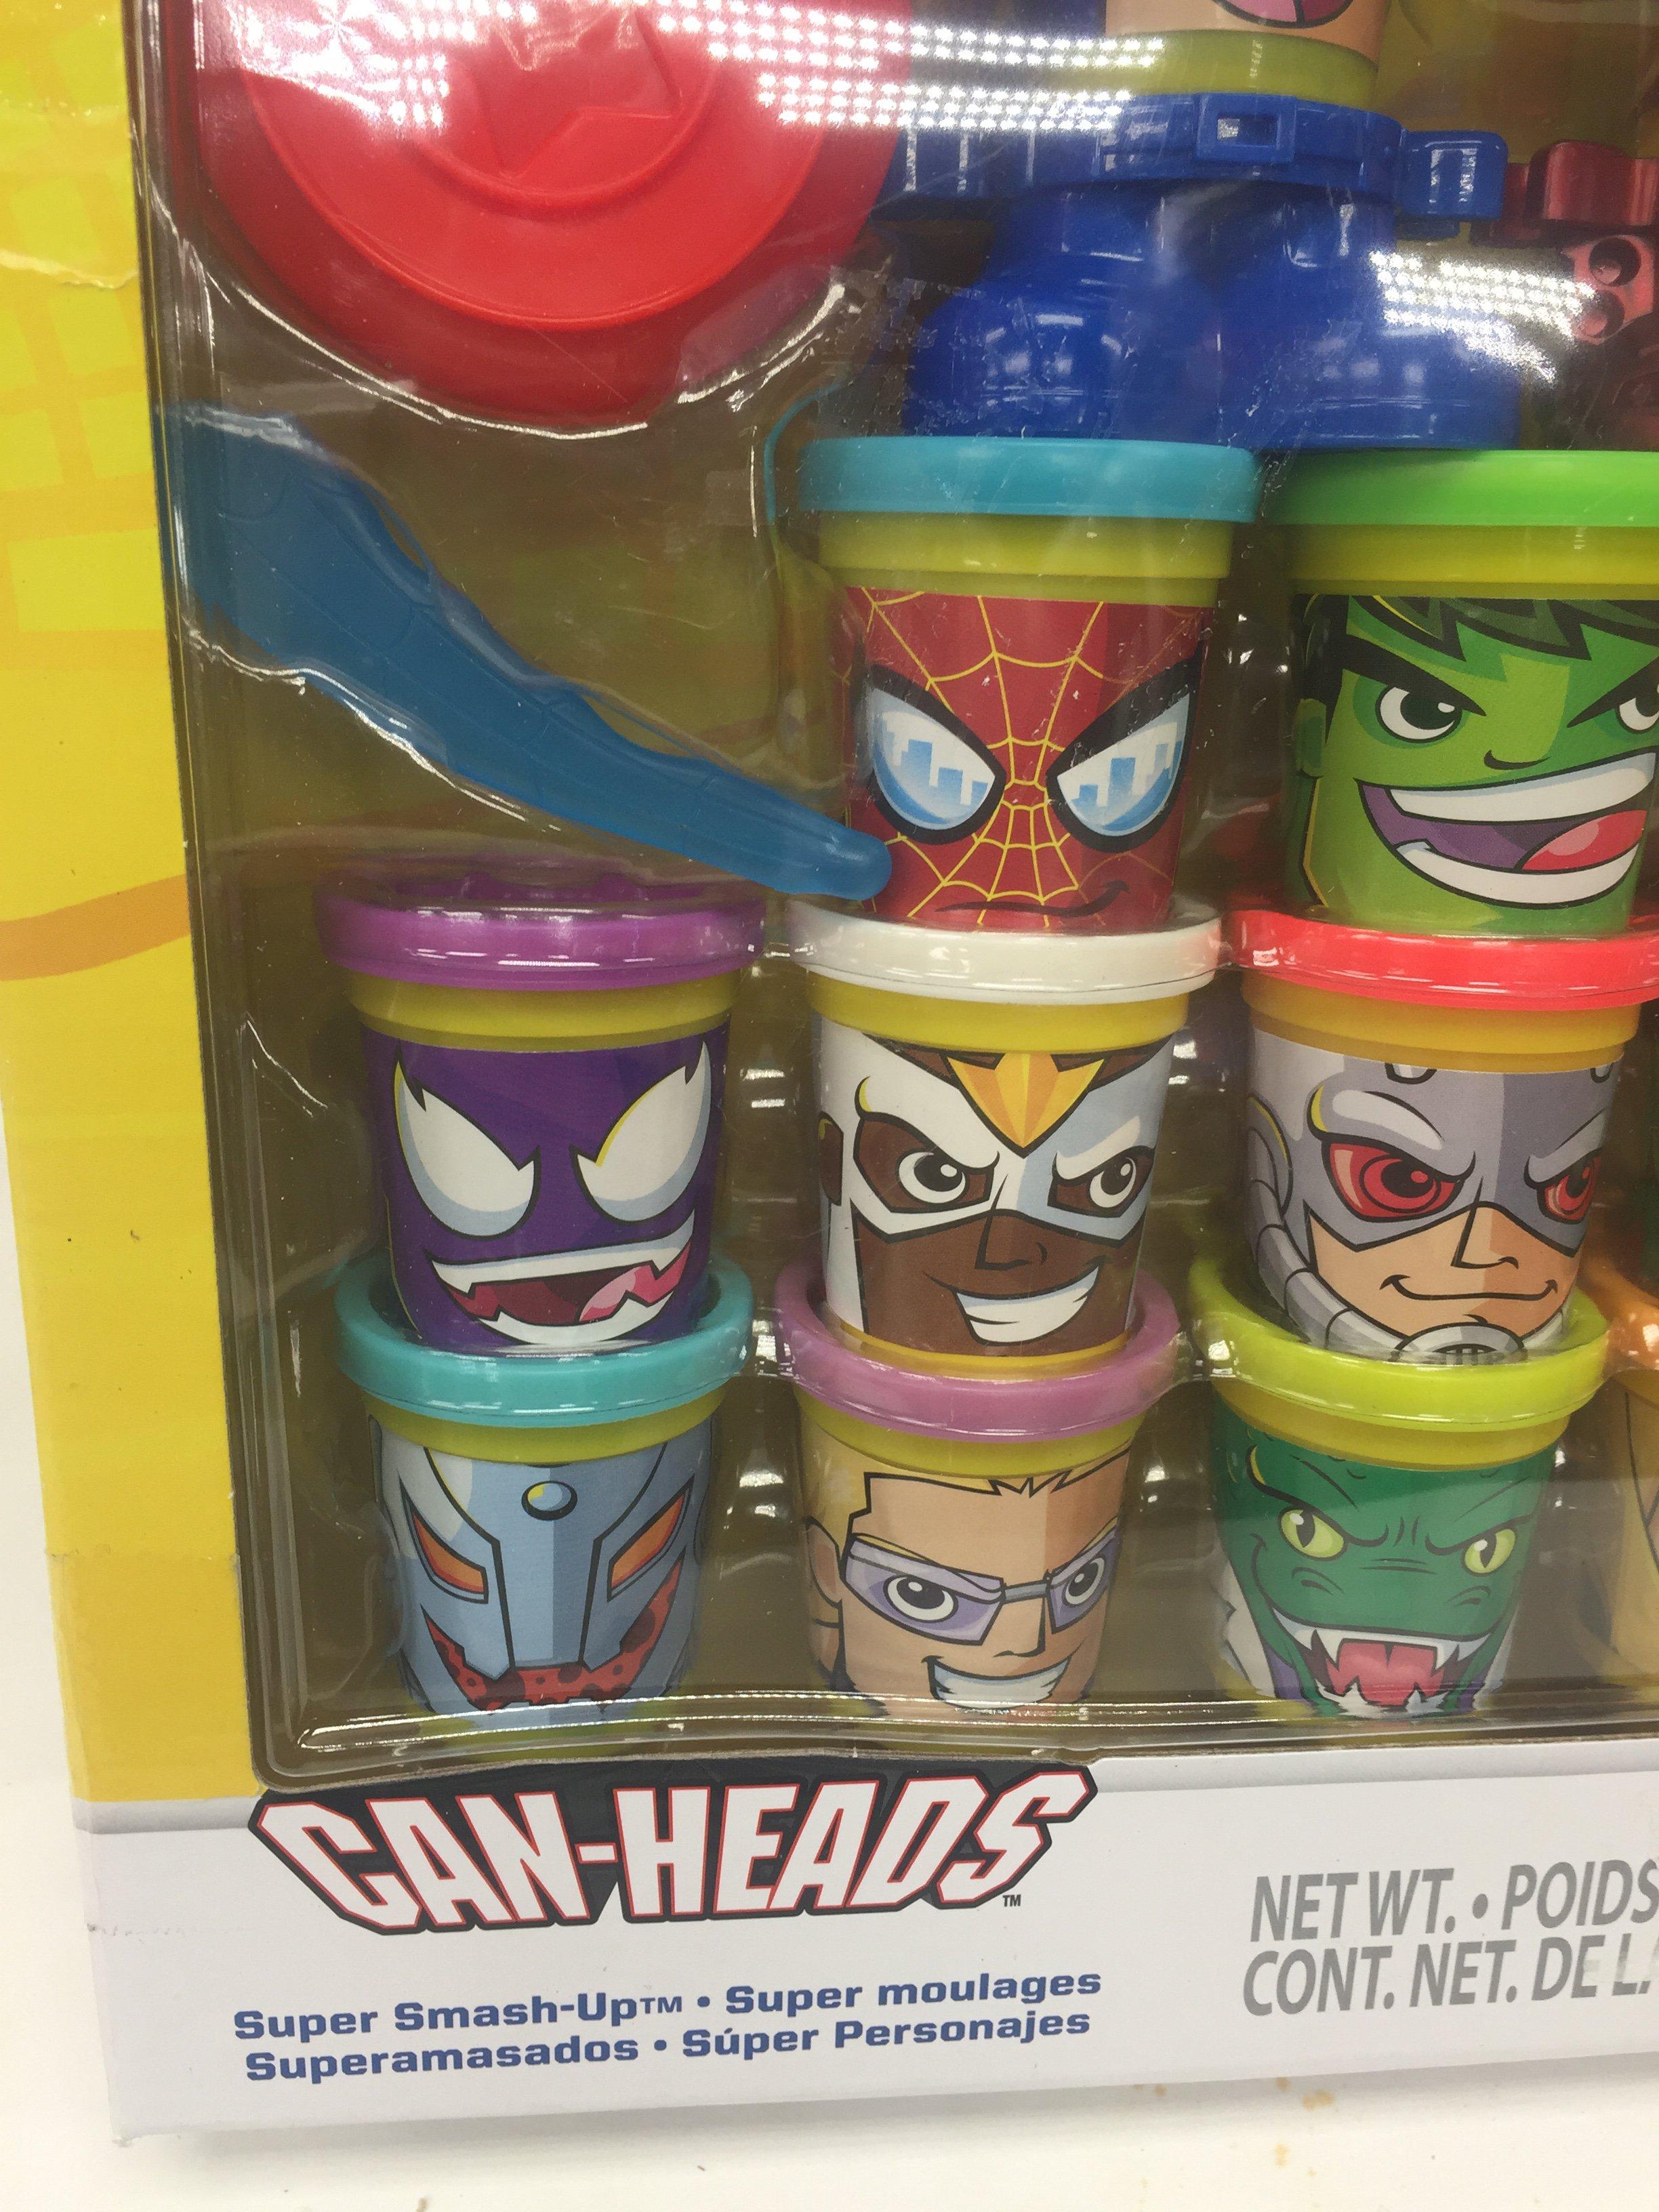 Play Doh 15 Can Can Heads Super Smash Ups